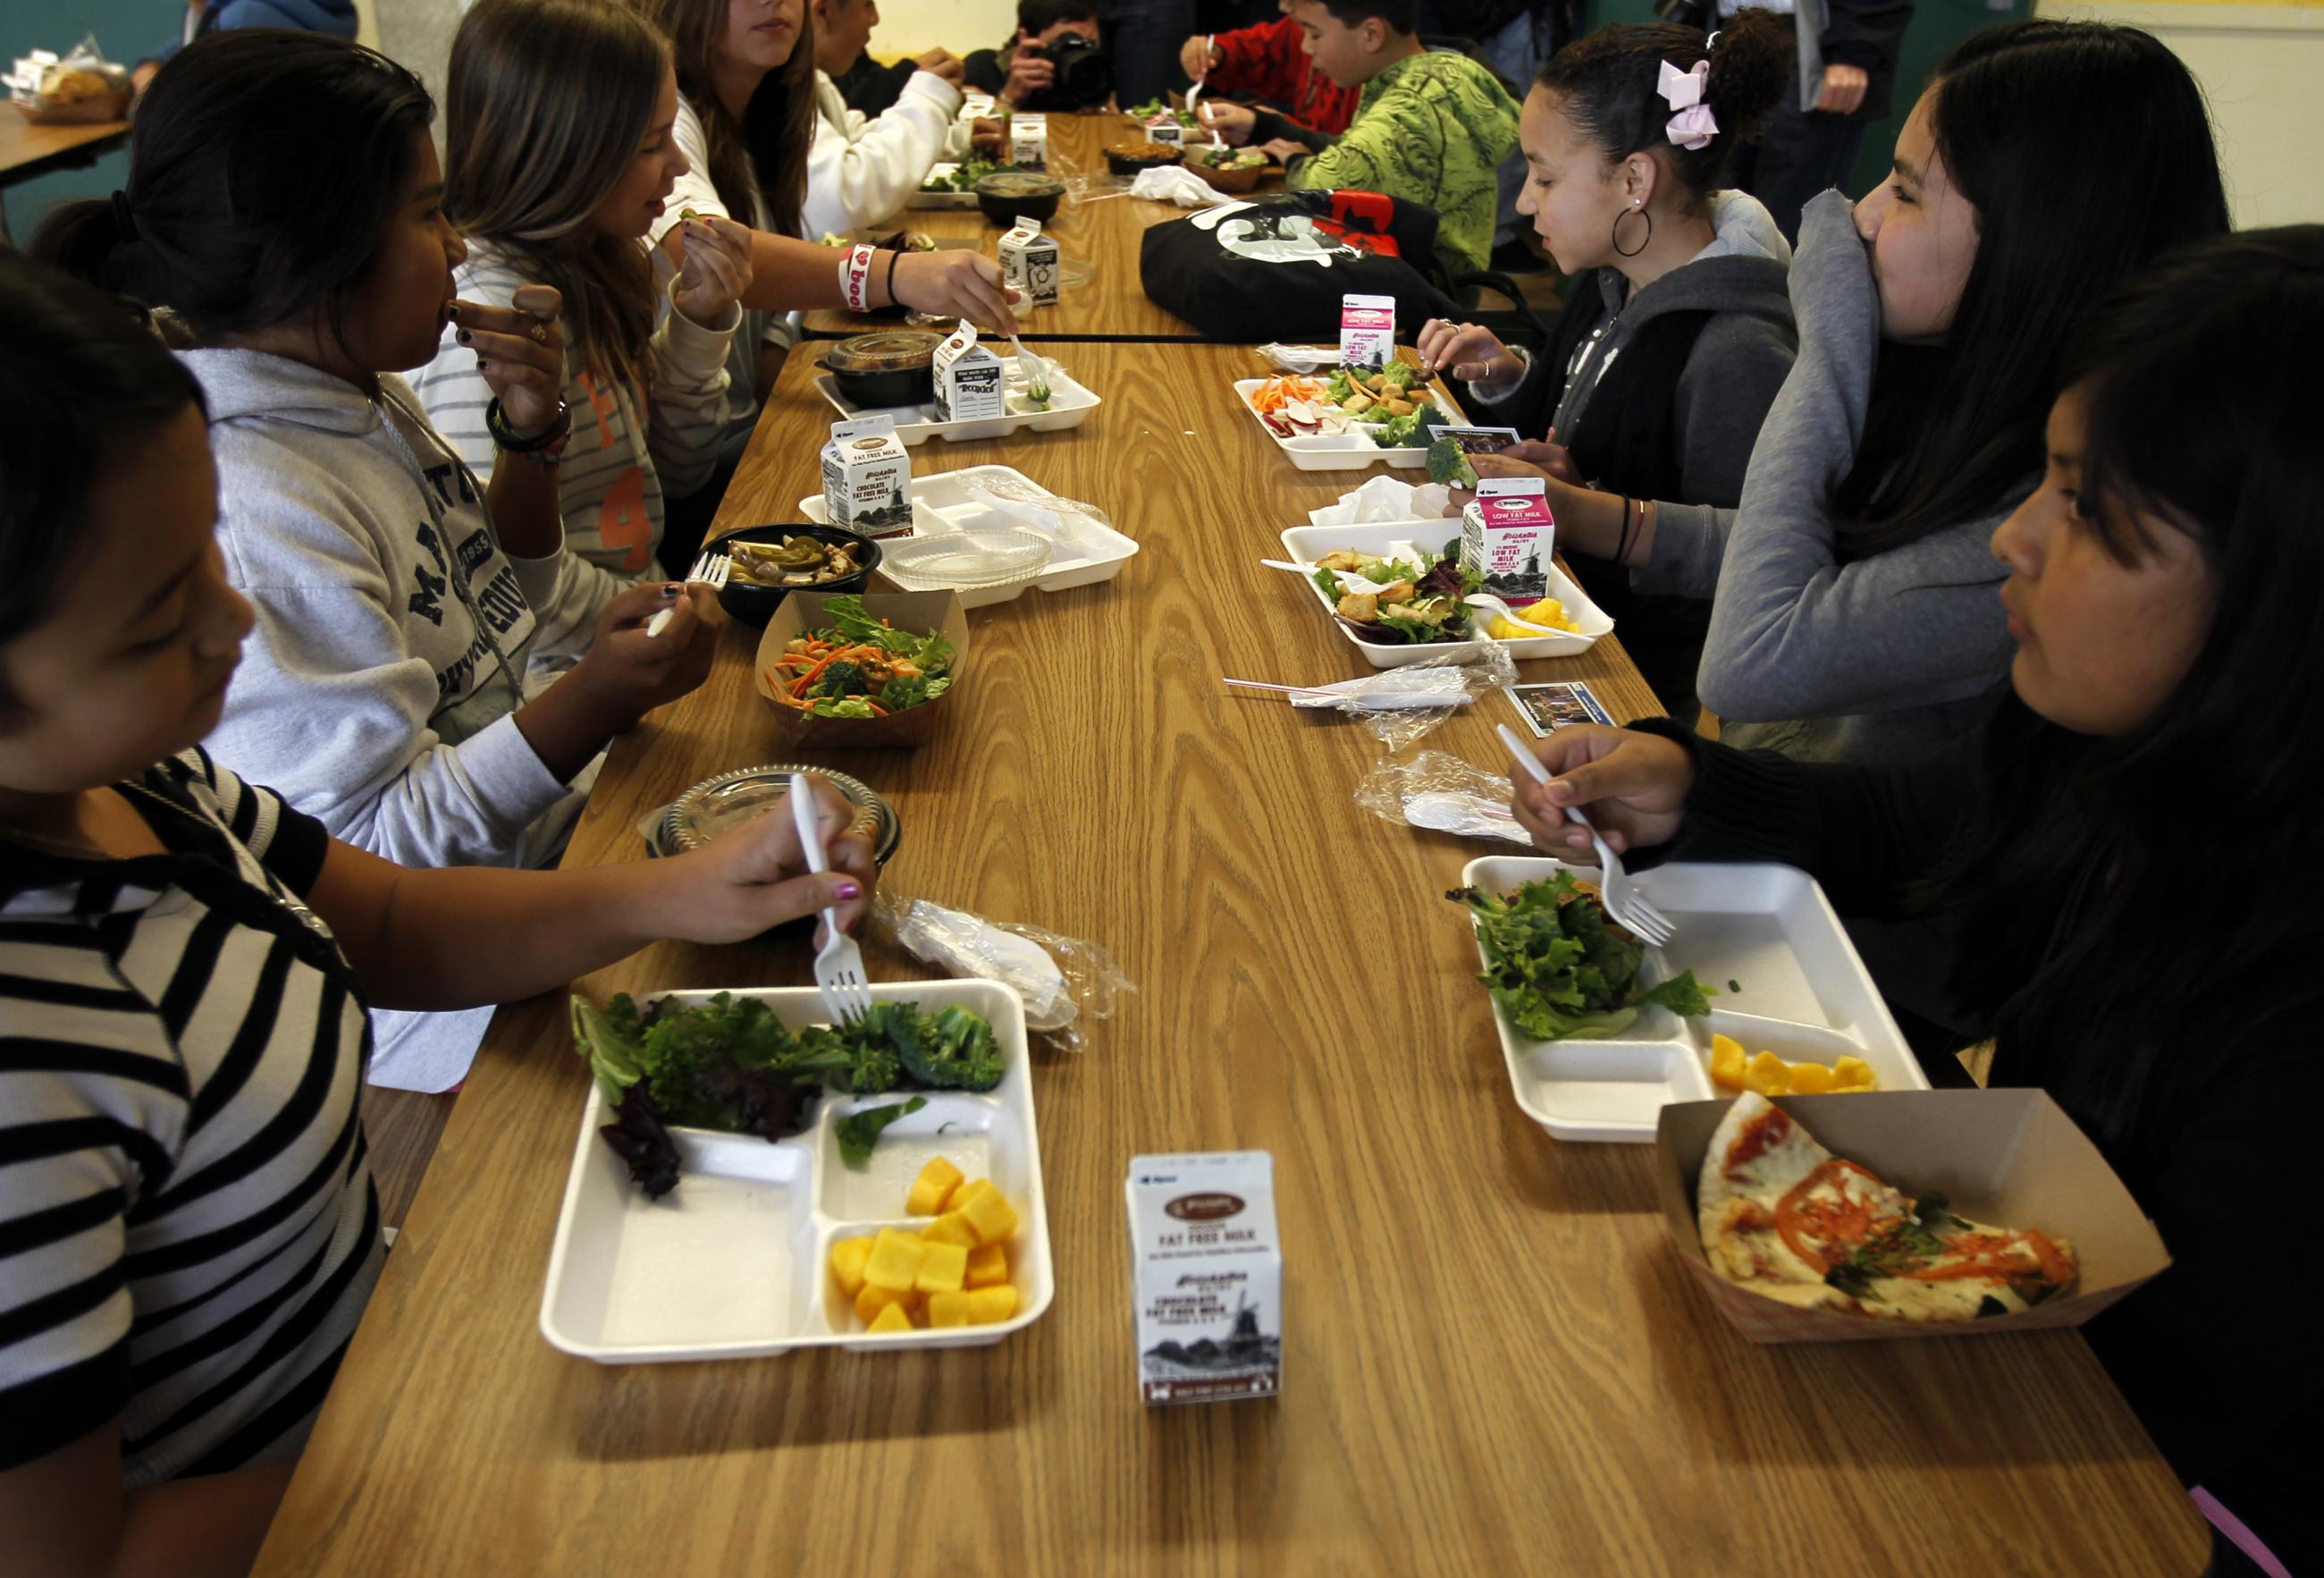 Students sit down to eat a healthy lunch at Marston Middle School.